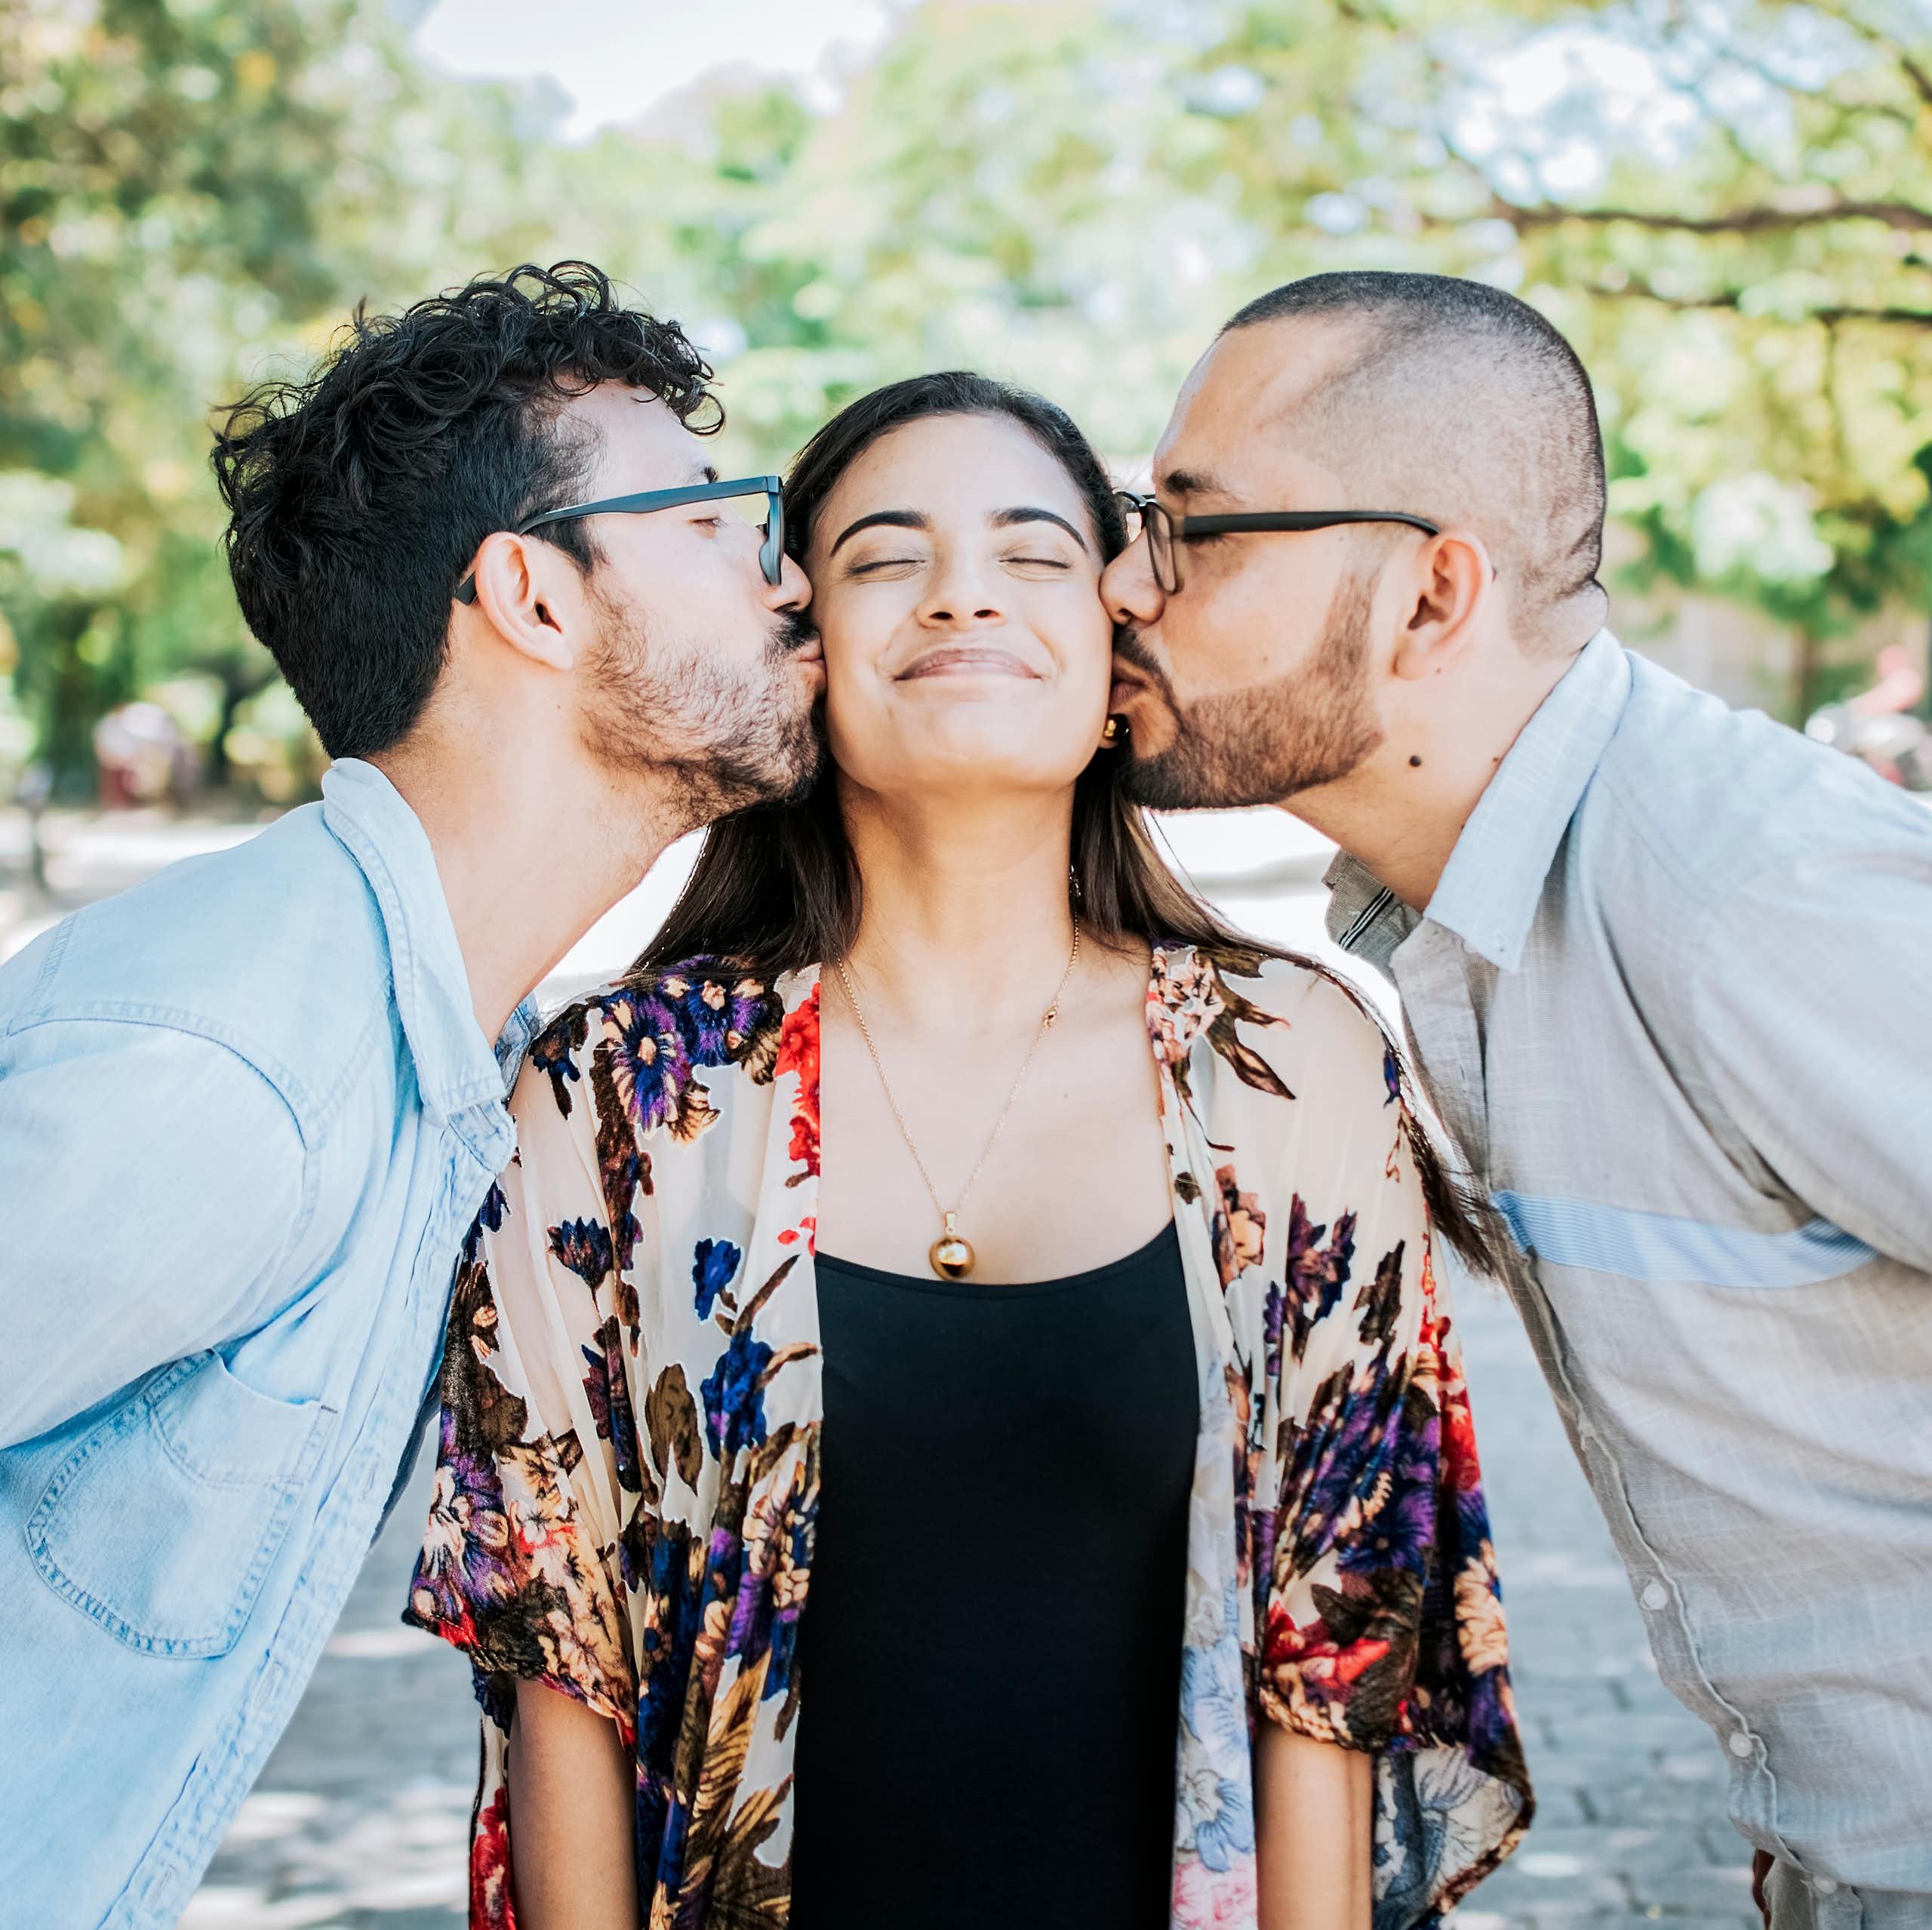 Thinking about polyamory? You’re not the only one